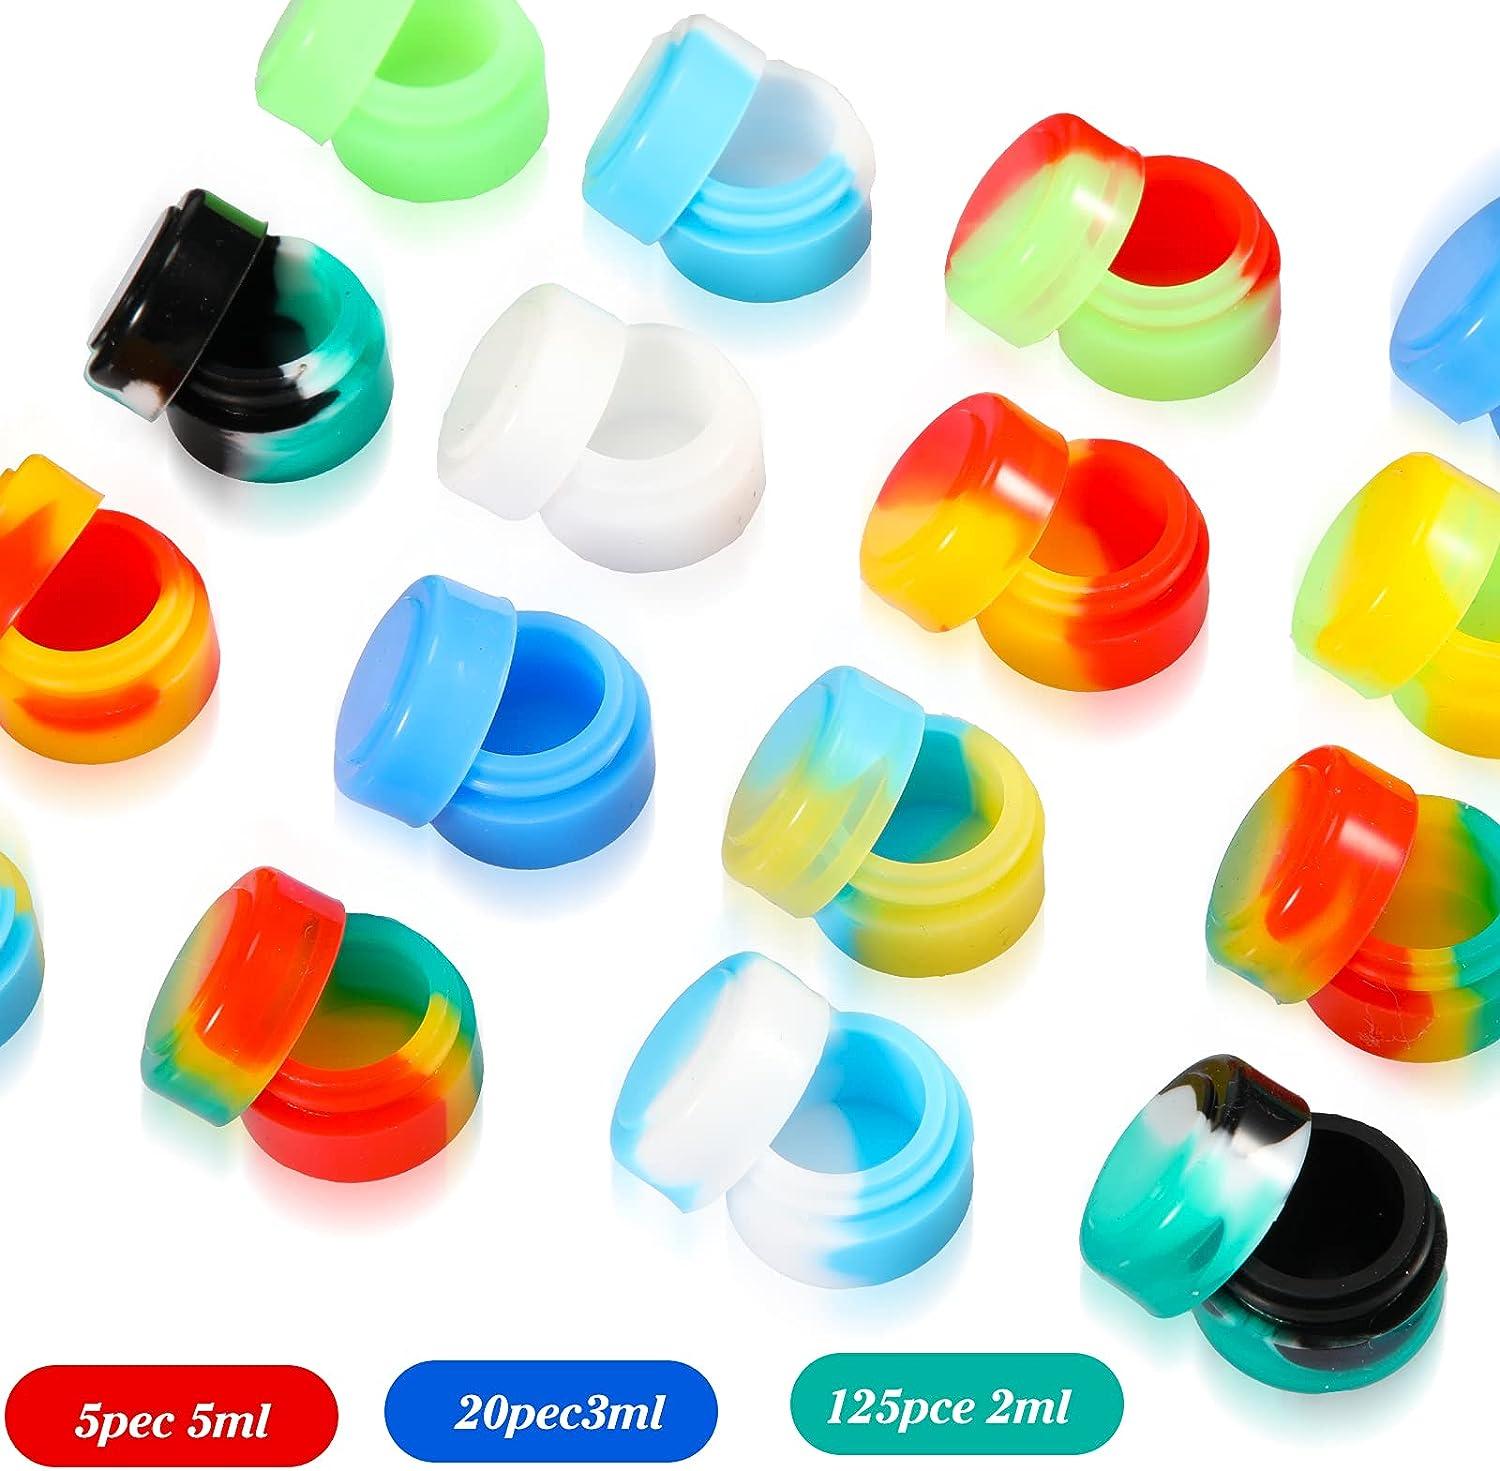  Pearwell 5ml Silicone Wax Containers Concentrate